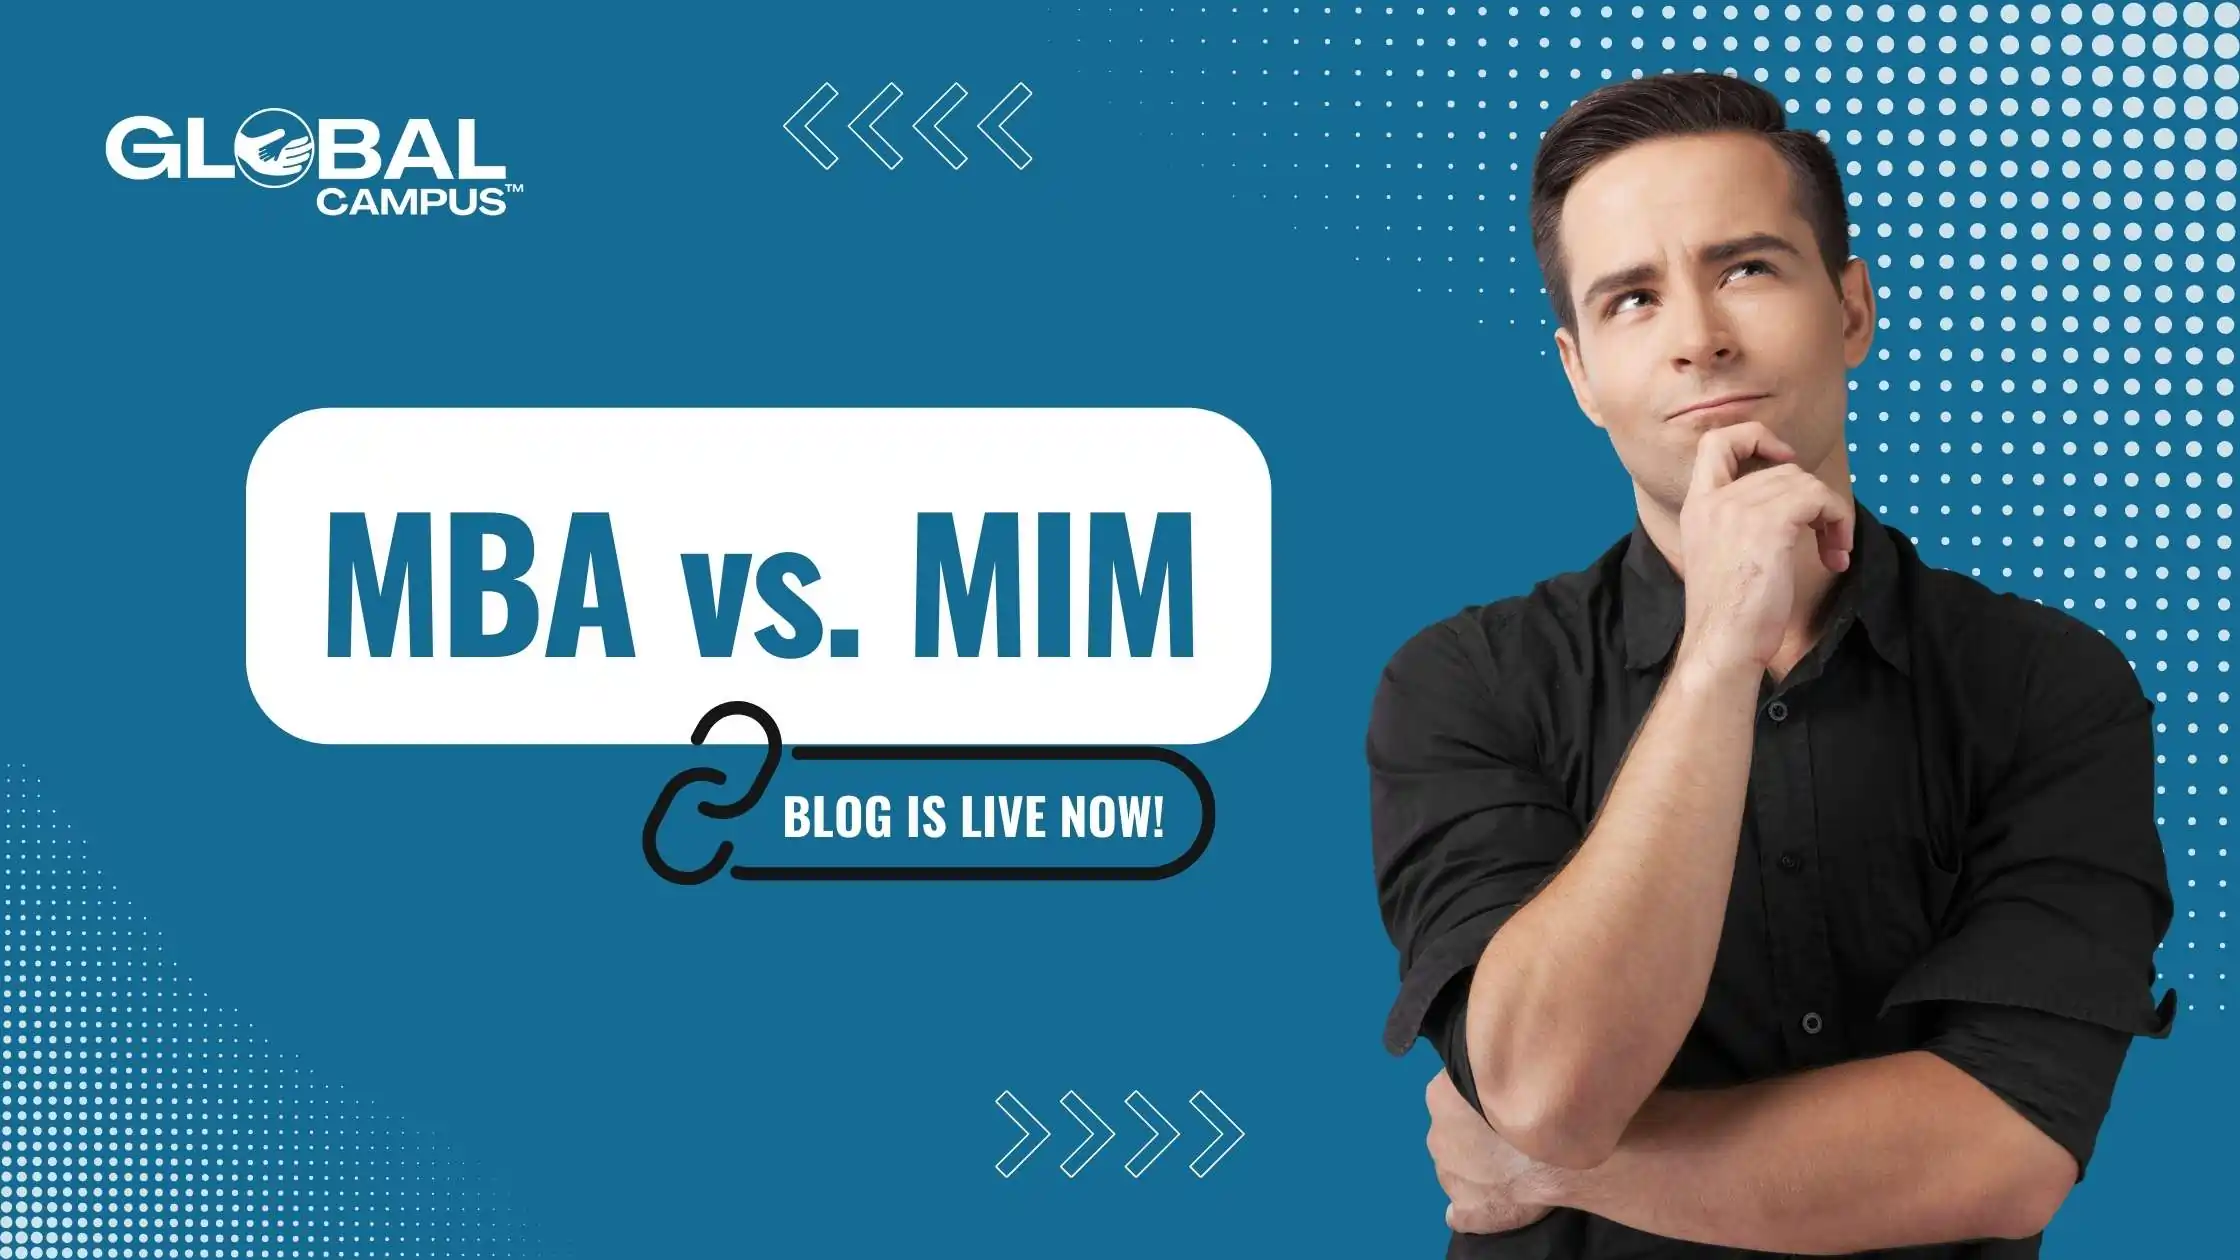 A confused male thinking about the differences between MBA & MIM.